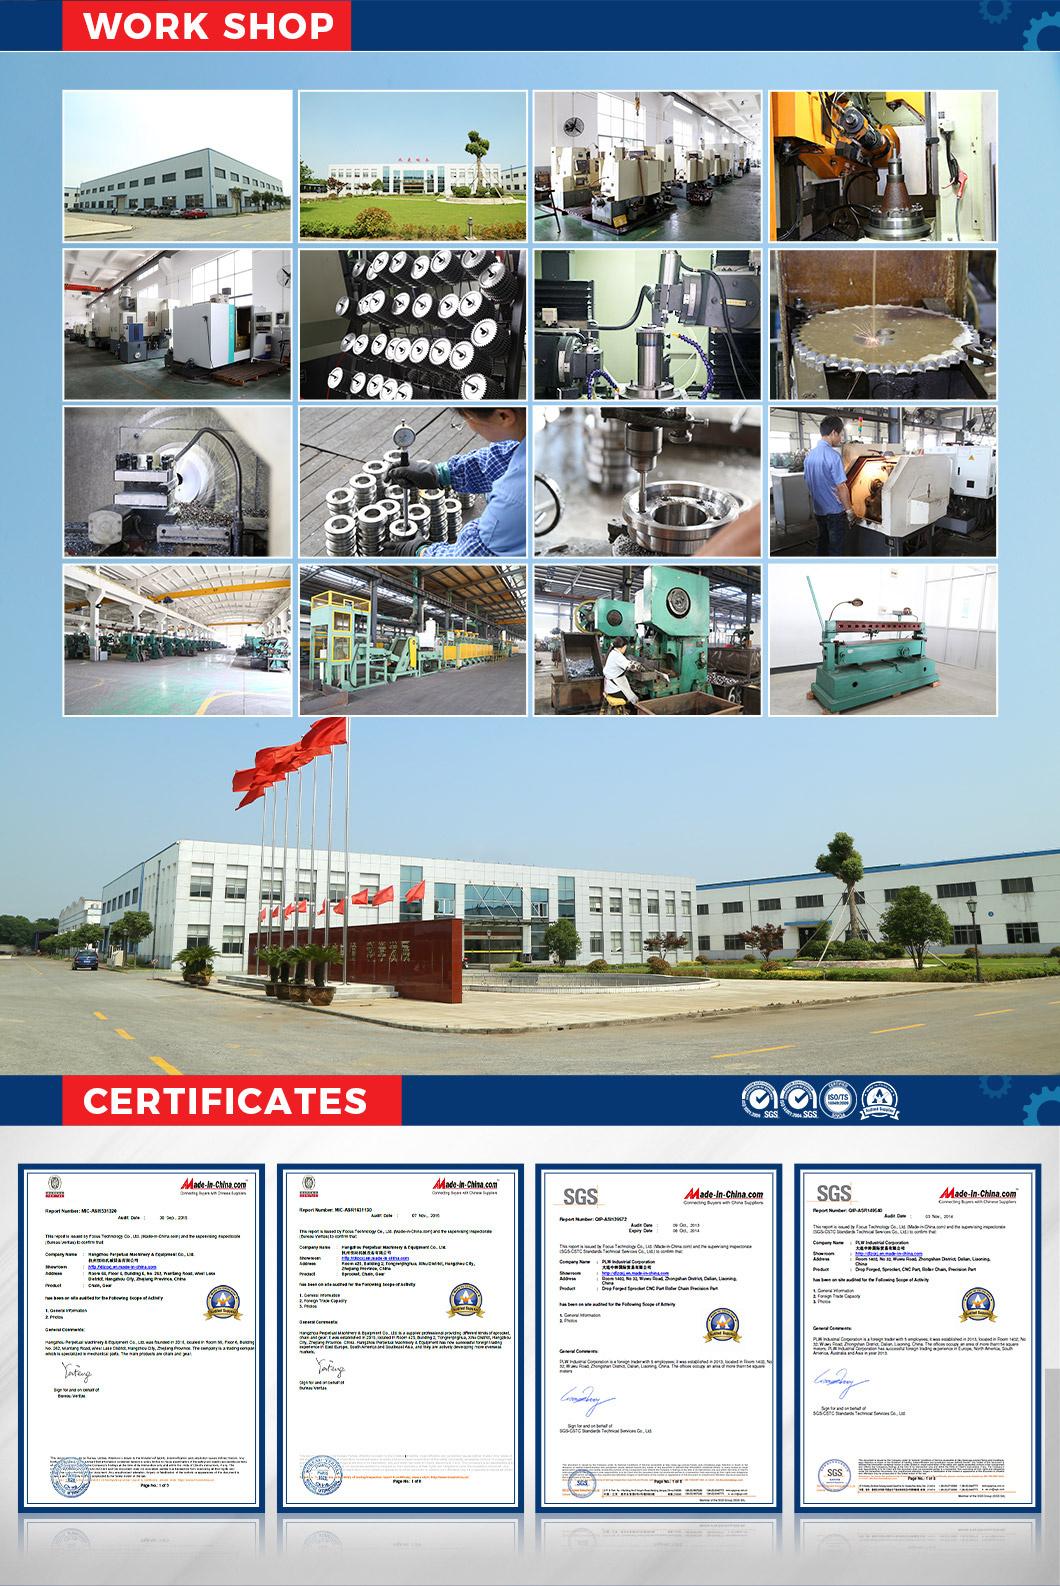 Competitive Price China Made Professional Agricultural Conveyor Chain